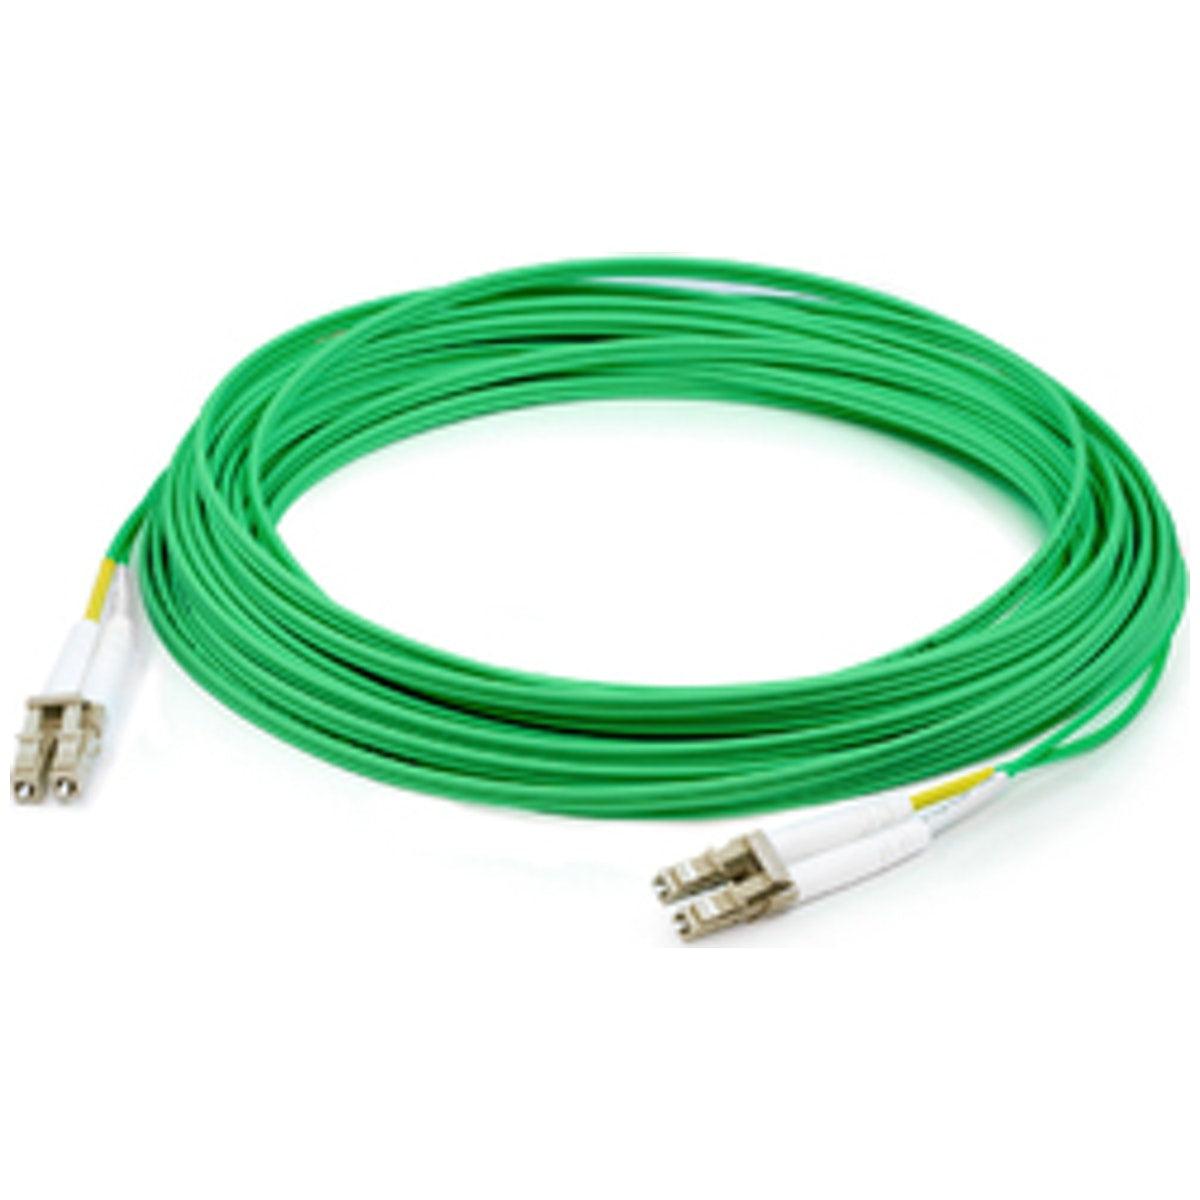 Addon Networks Add-Lc-Lc-2M5Om4-Gn Fibre Optic Cable 2 M Lomm Om4 Green